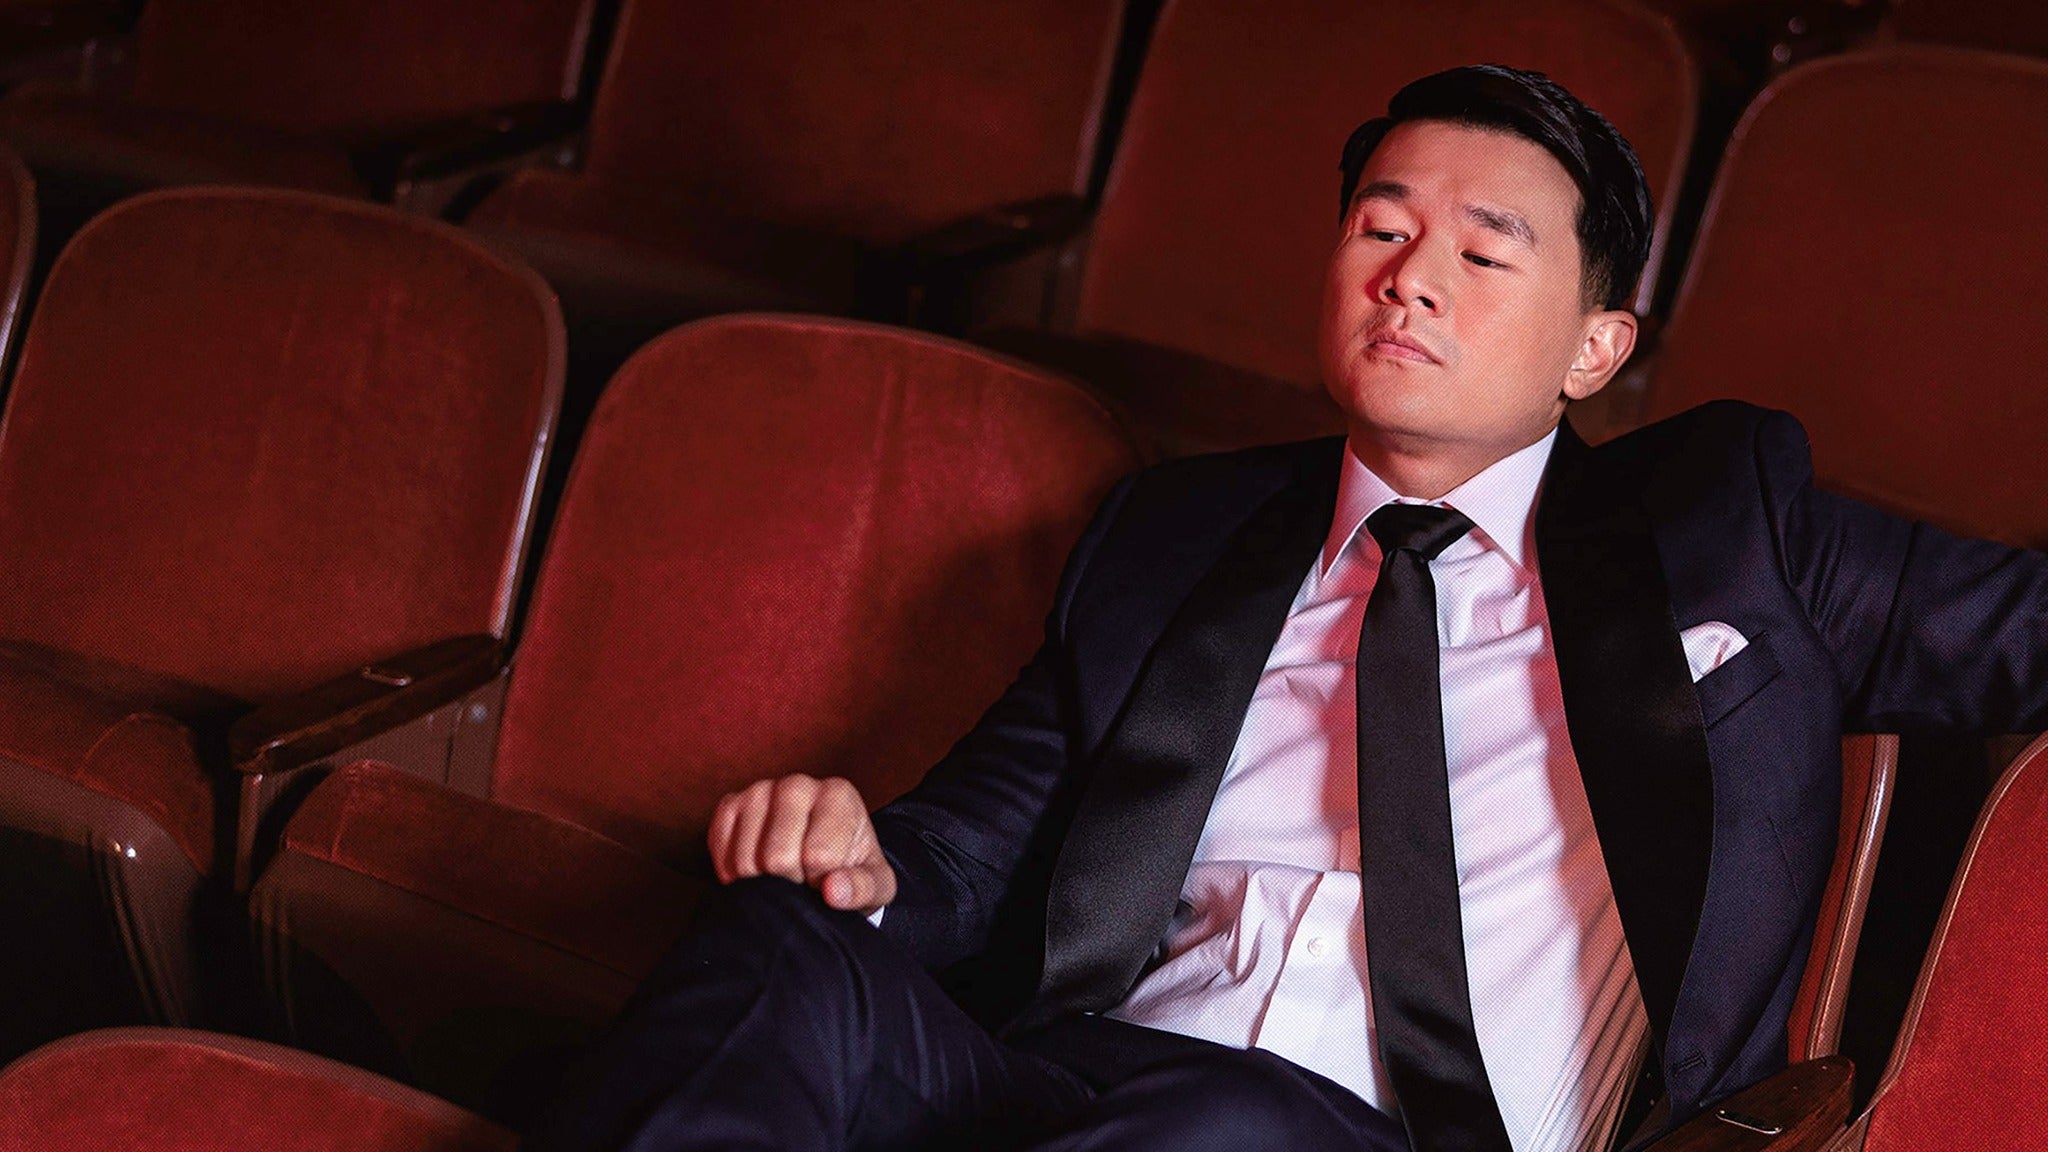 Ronny Chieng: The Hope You Get Rich Tour in Dallas promo photo for Live Nation Mobile App presale offer code